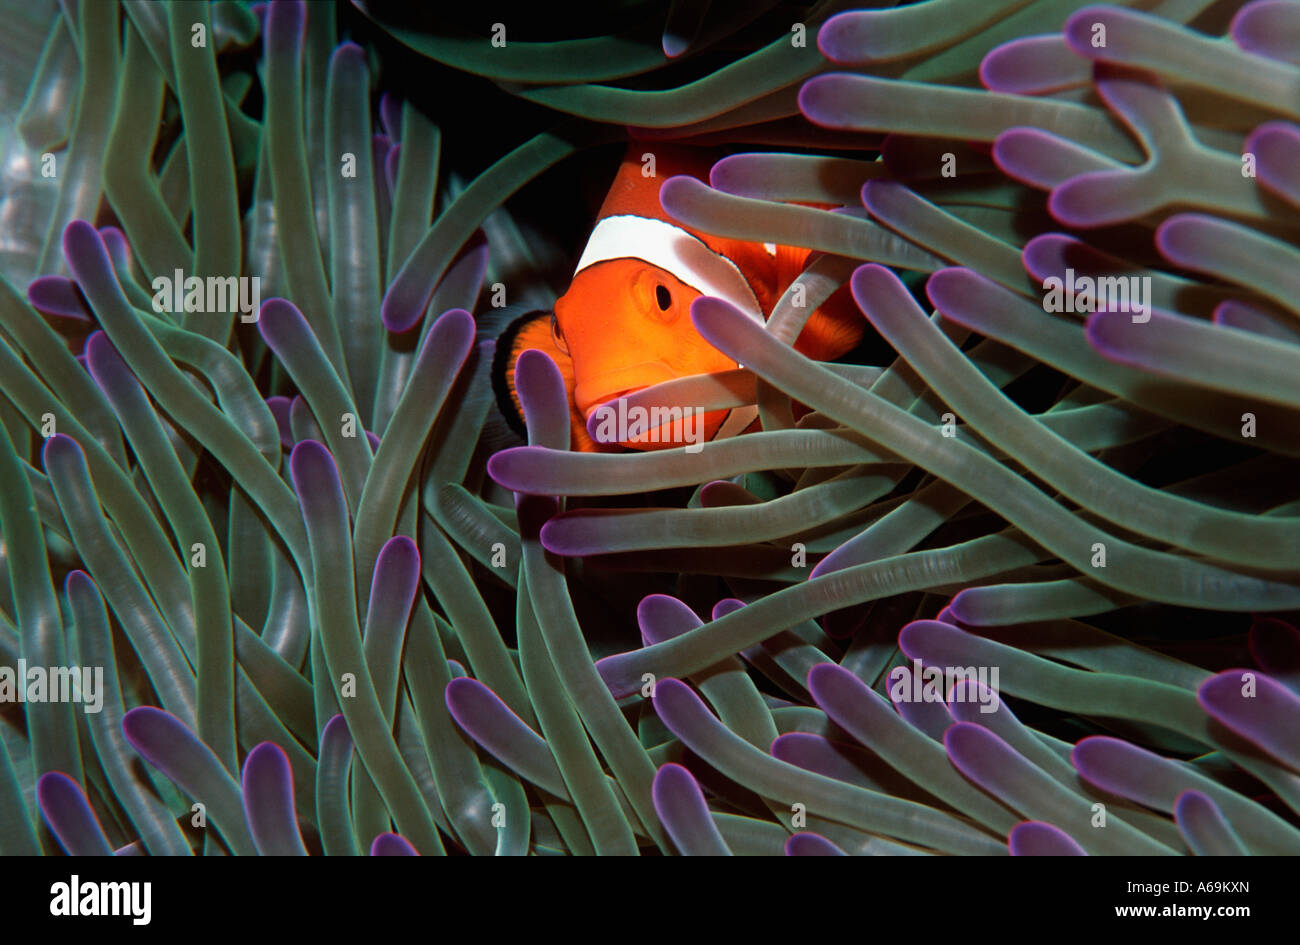 False clown anemonefish Amphiprion ocellaris in host anemone Malaysia Foto Stock